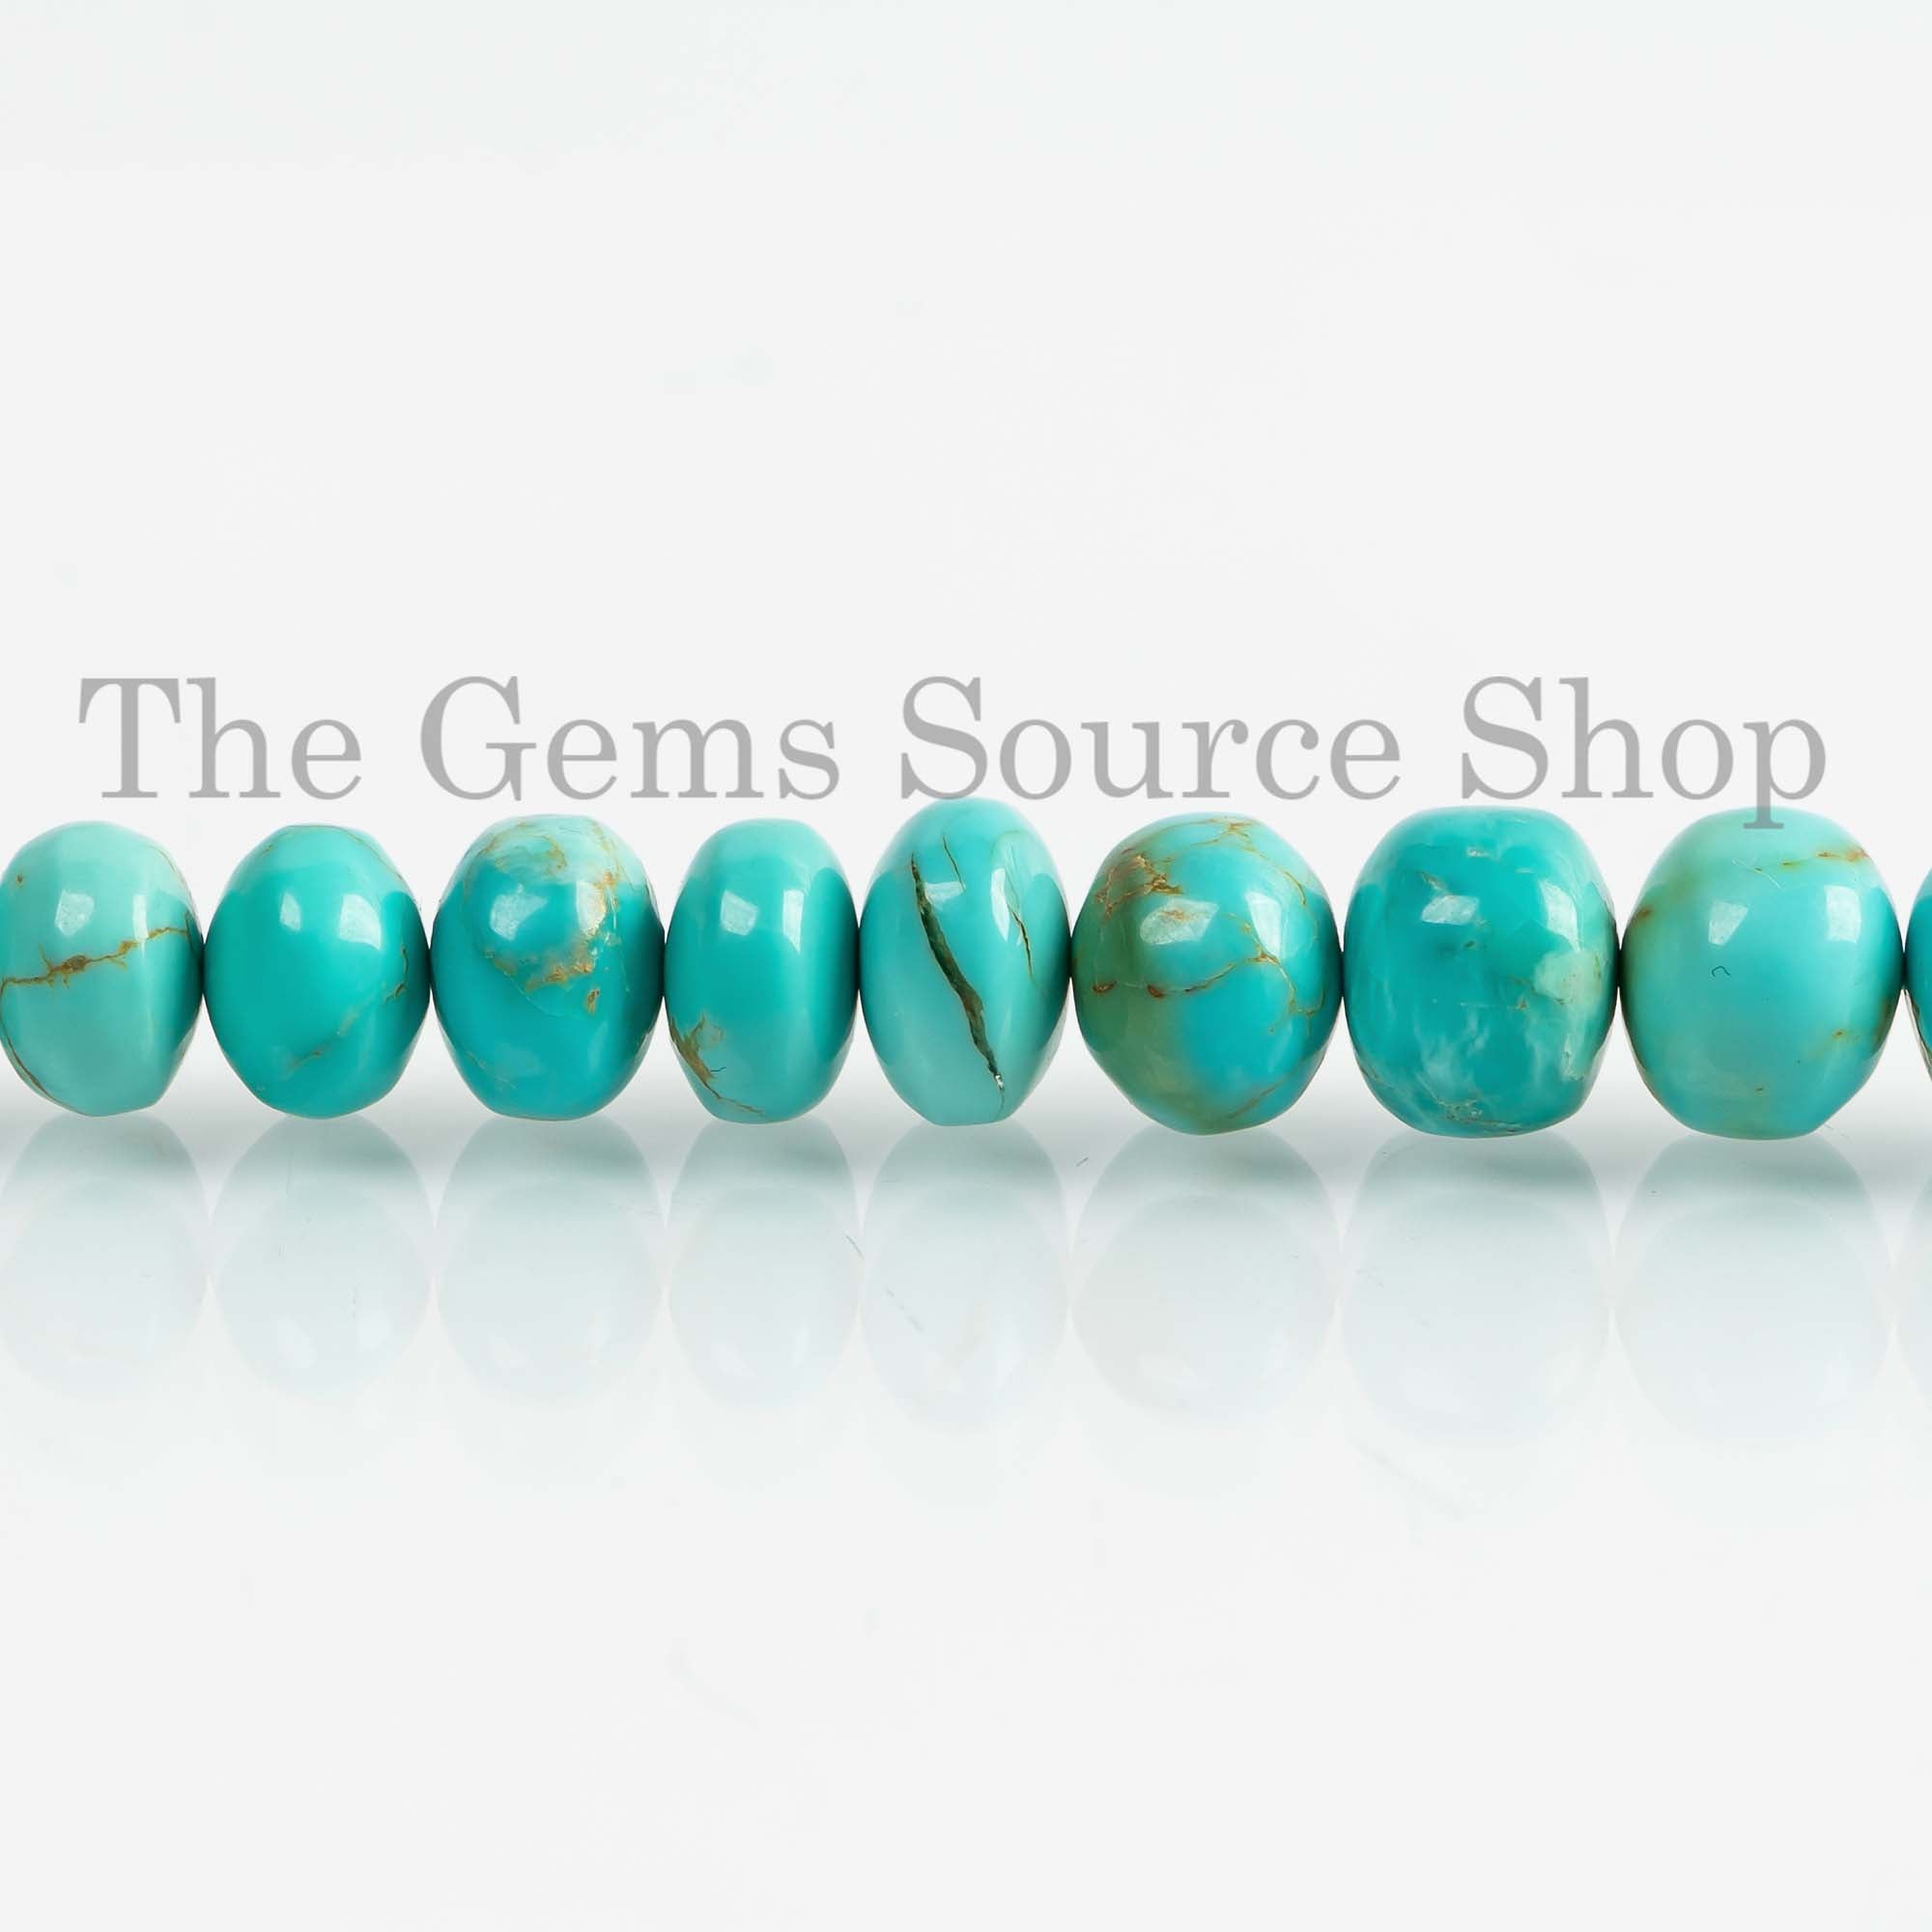 7-11 mm Turquoise Smooth Rondelle Beads, Loose Turquoise Strand, Turquoise Gemstone